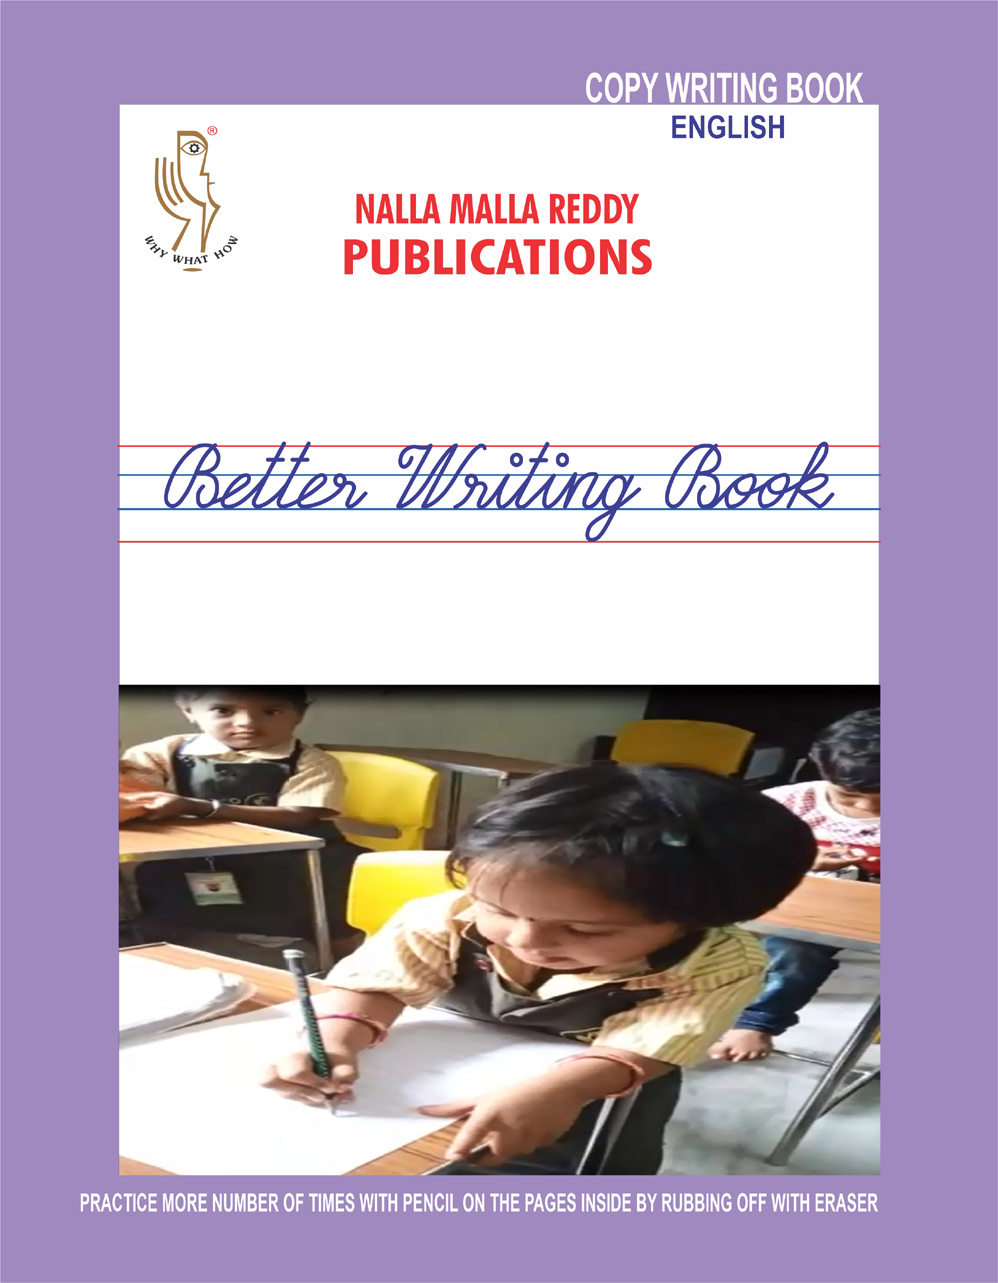 English Copy Writing Book Tittle website